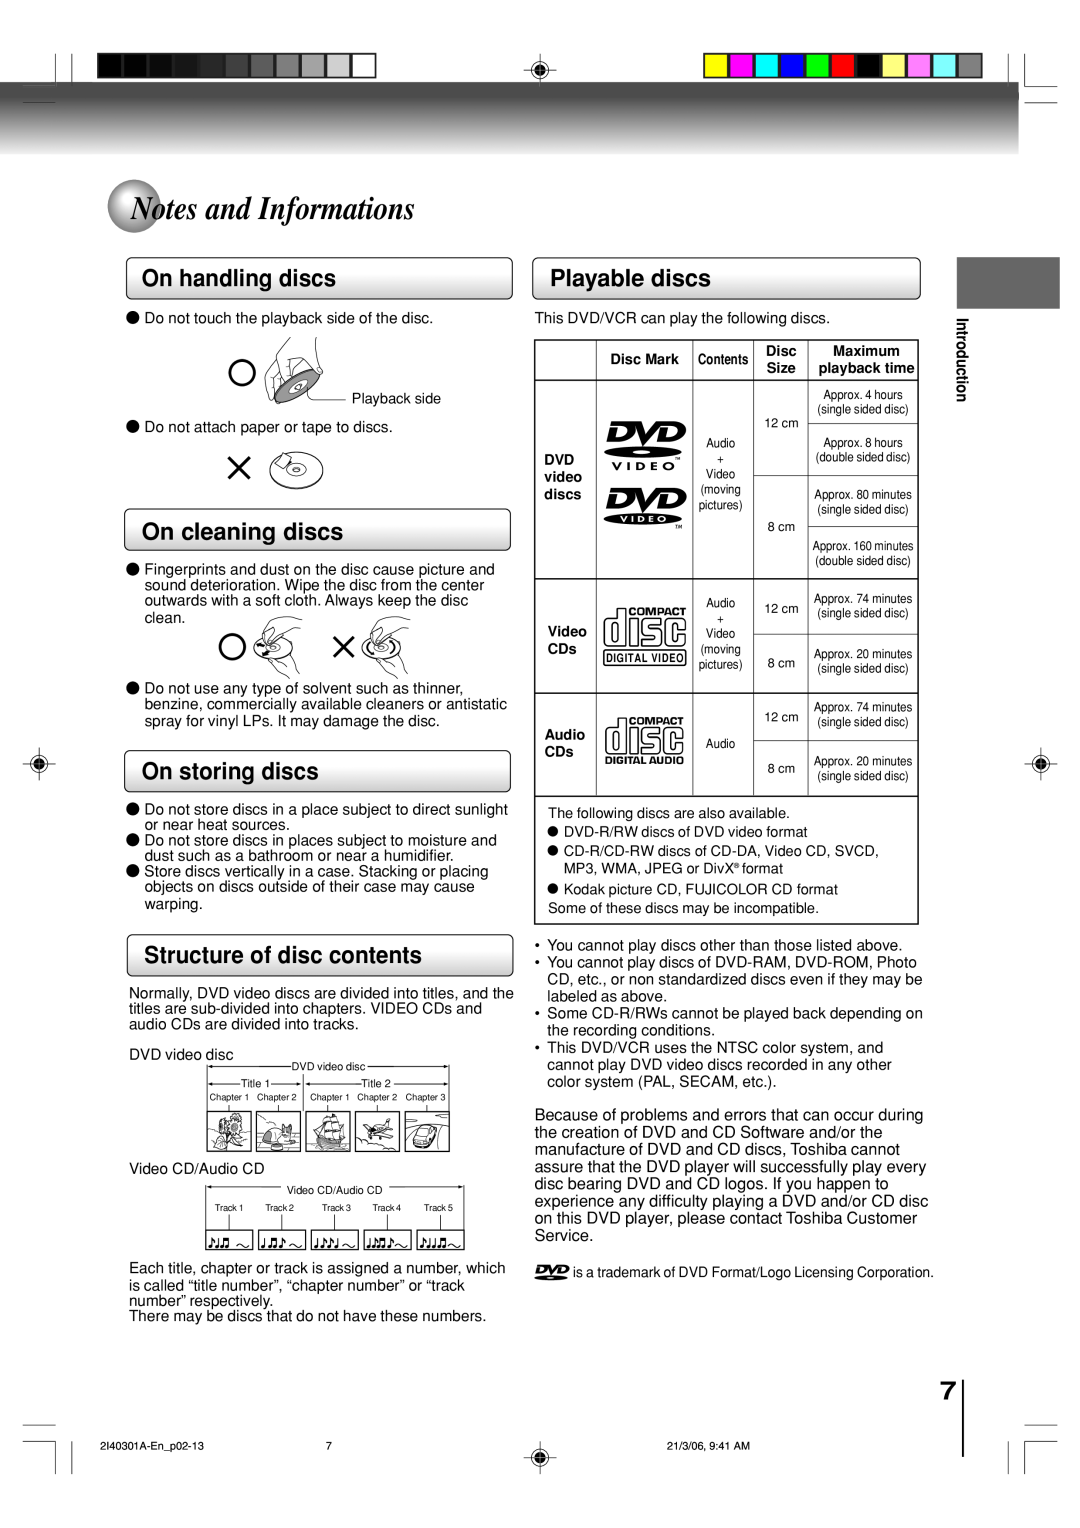 Toshiba SD-V594SC Notes and Informations, On handling discs, On cleaning discs, On storing discs, Playable discs, Disc 